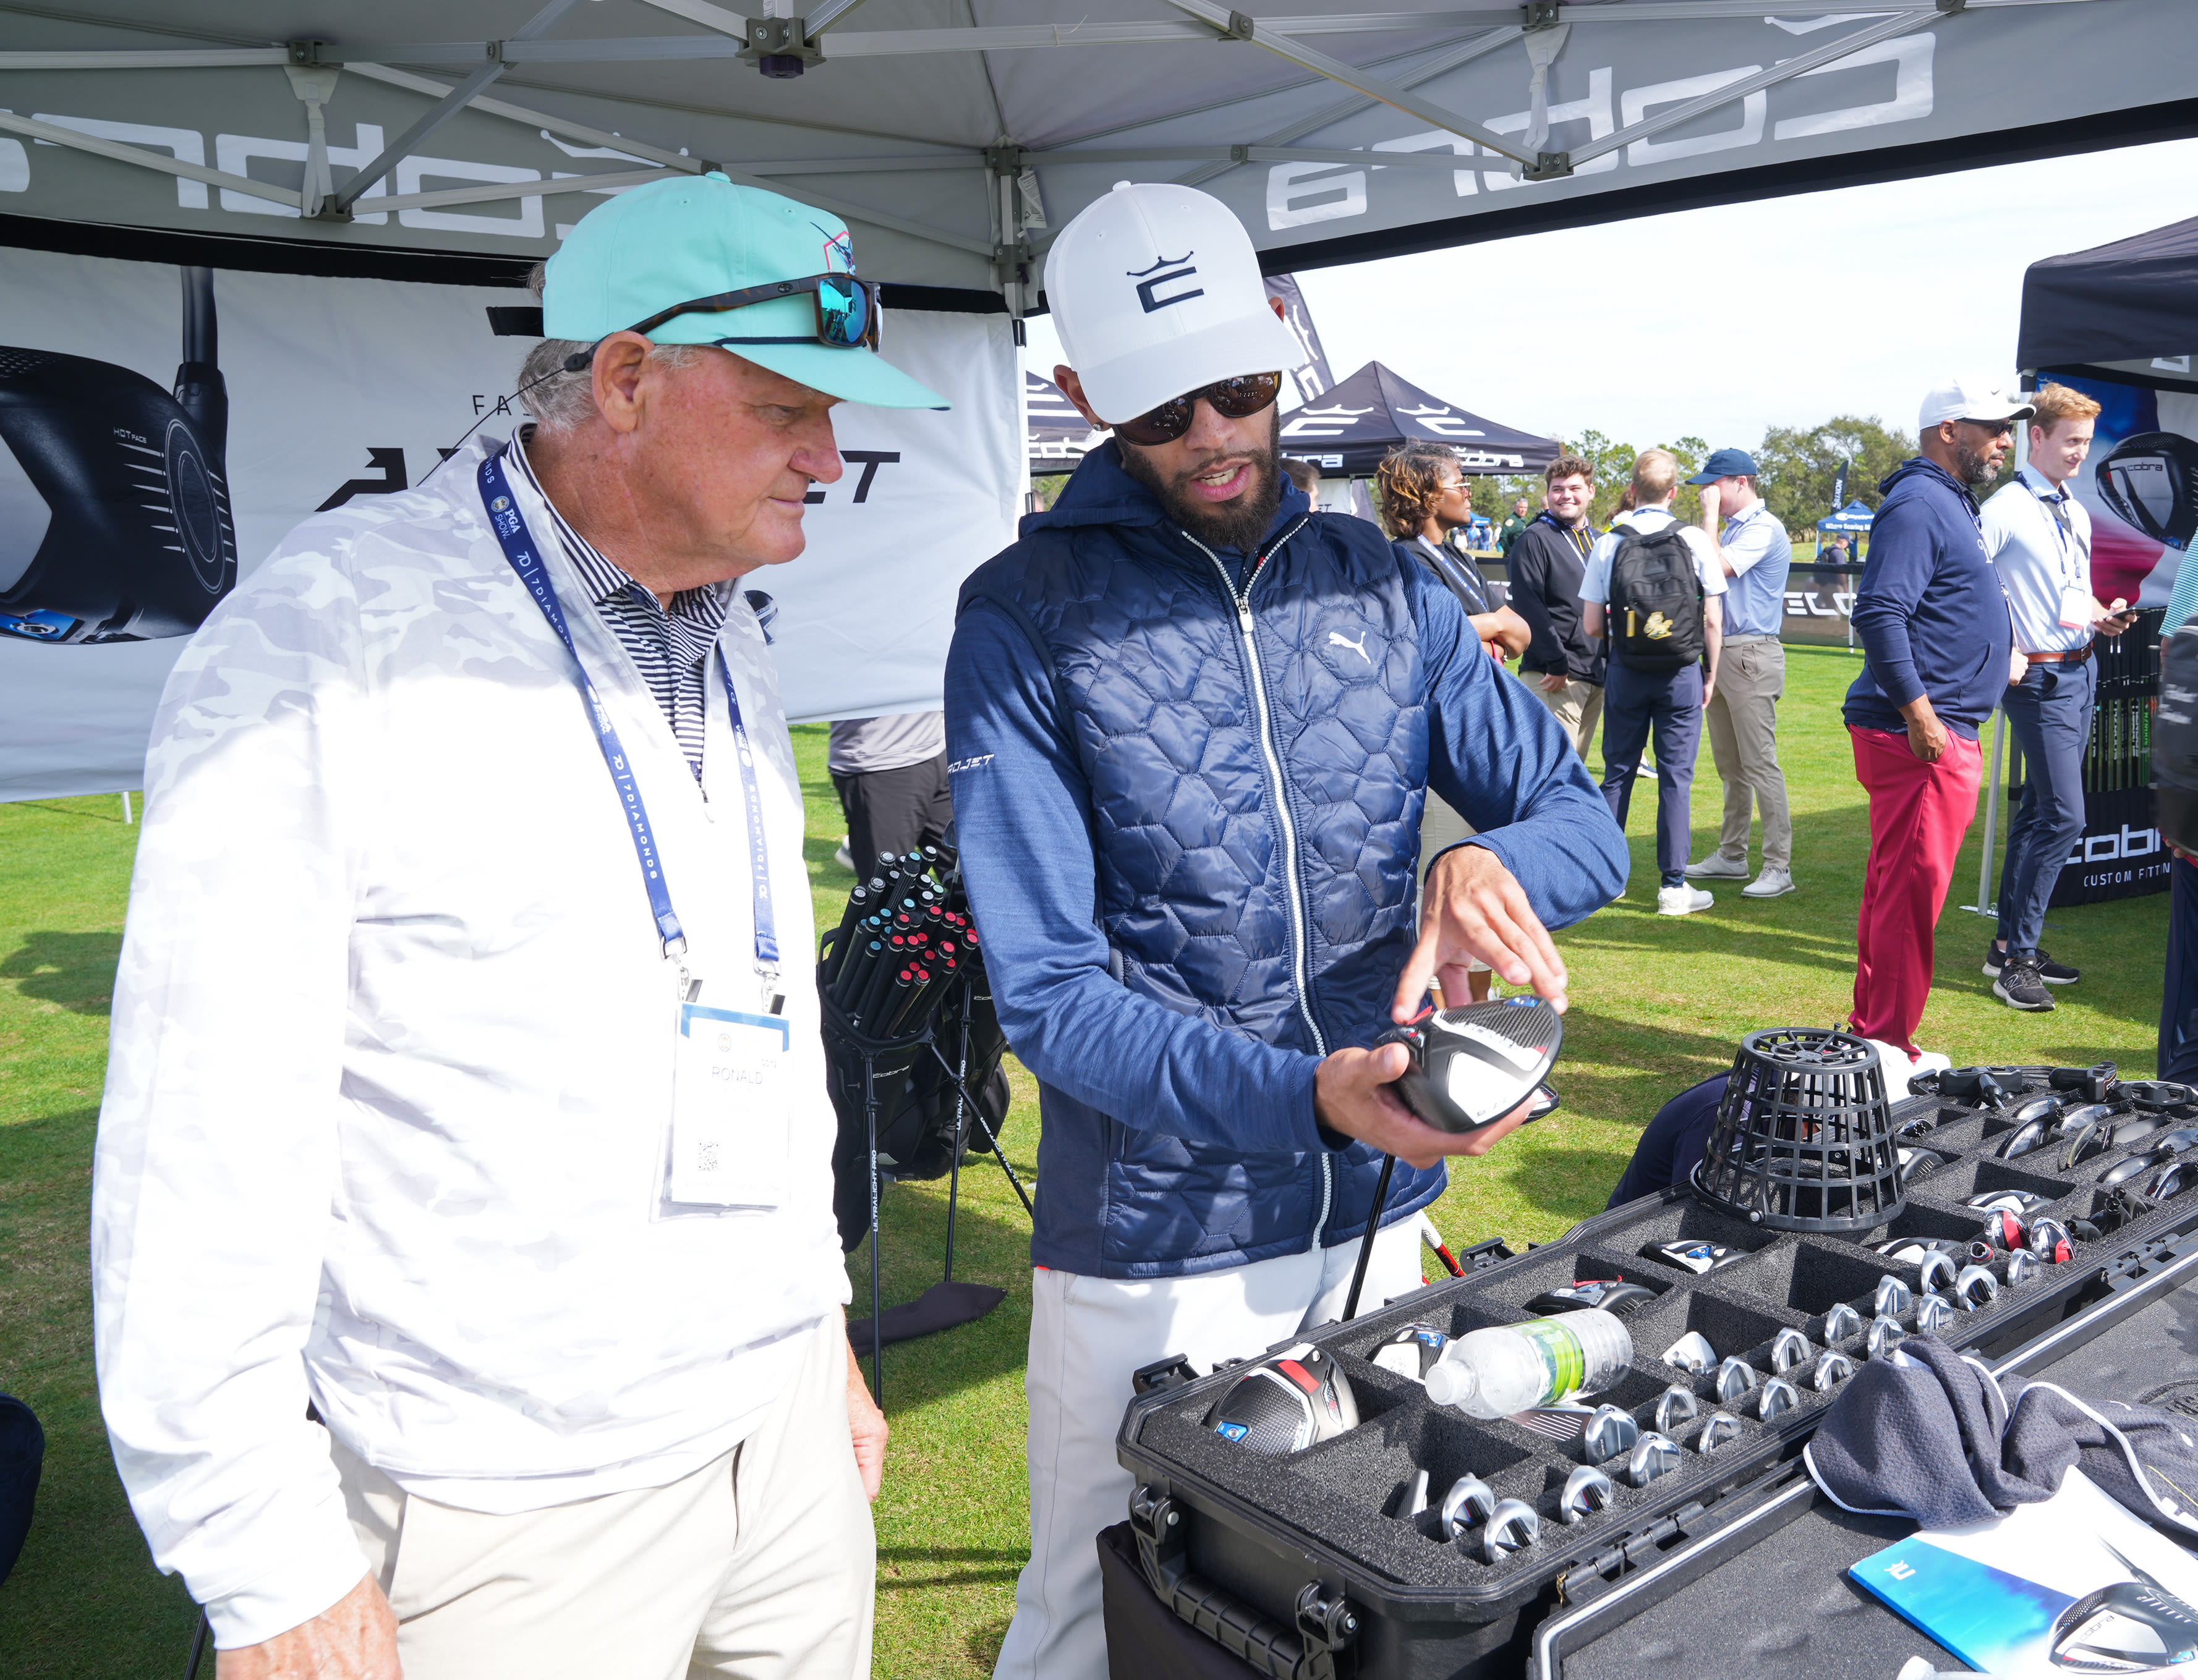 A Demo & Fitting Day attendee learns more about the Aerojet woods during a visit to the Cobra Golf area at Orange County National Golf Center on Jan. 24, 2023 in Orlando, Florida. (Photo by Darren Carroll/PGA of America)